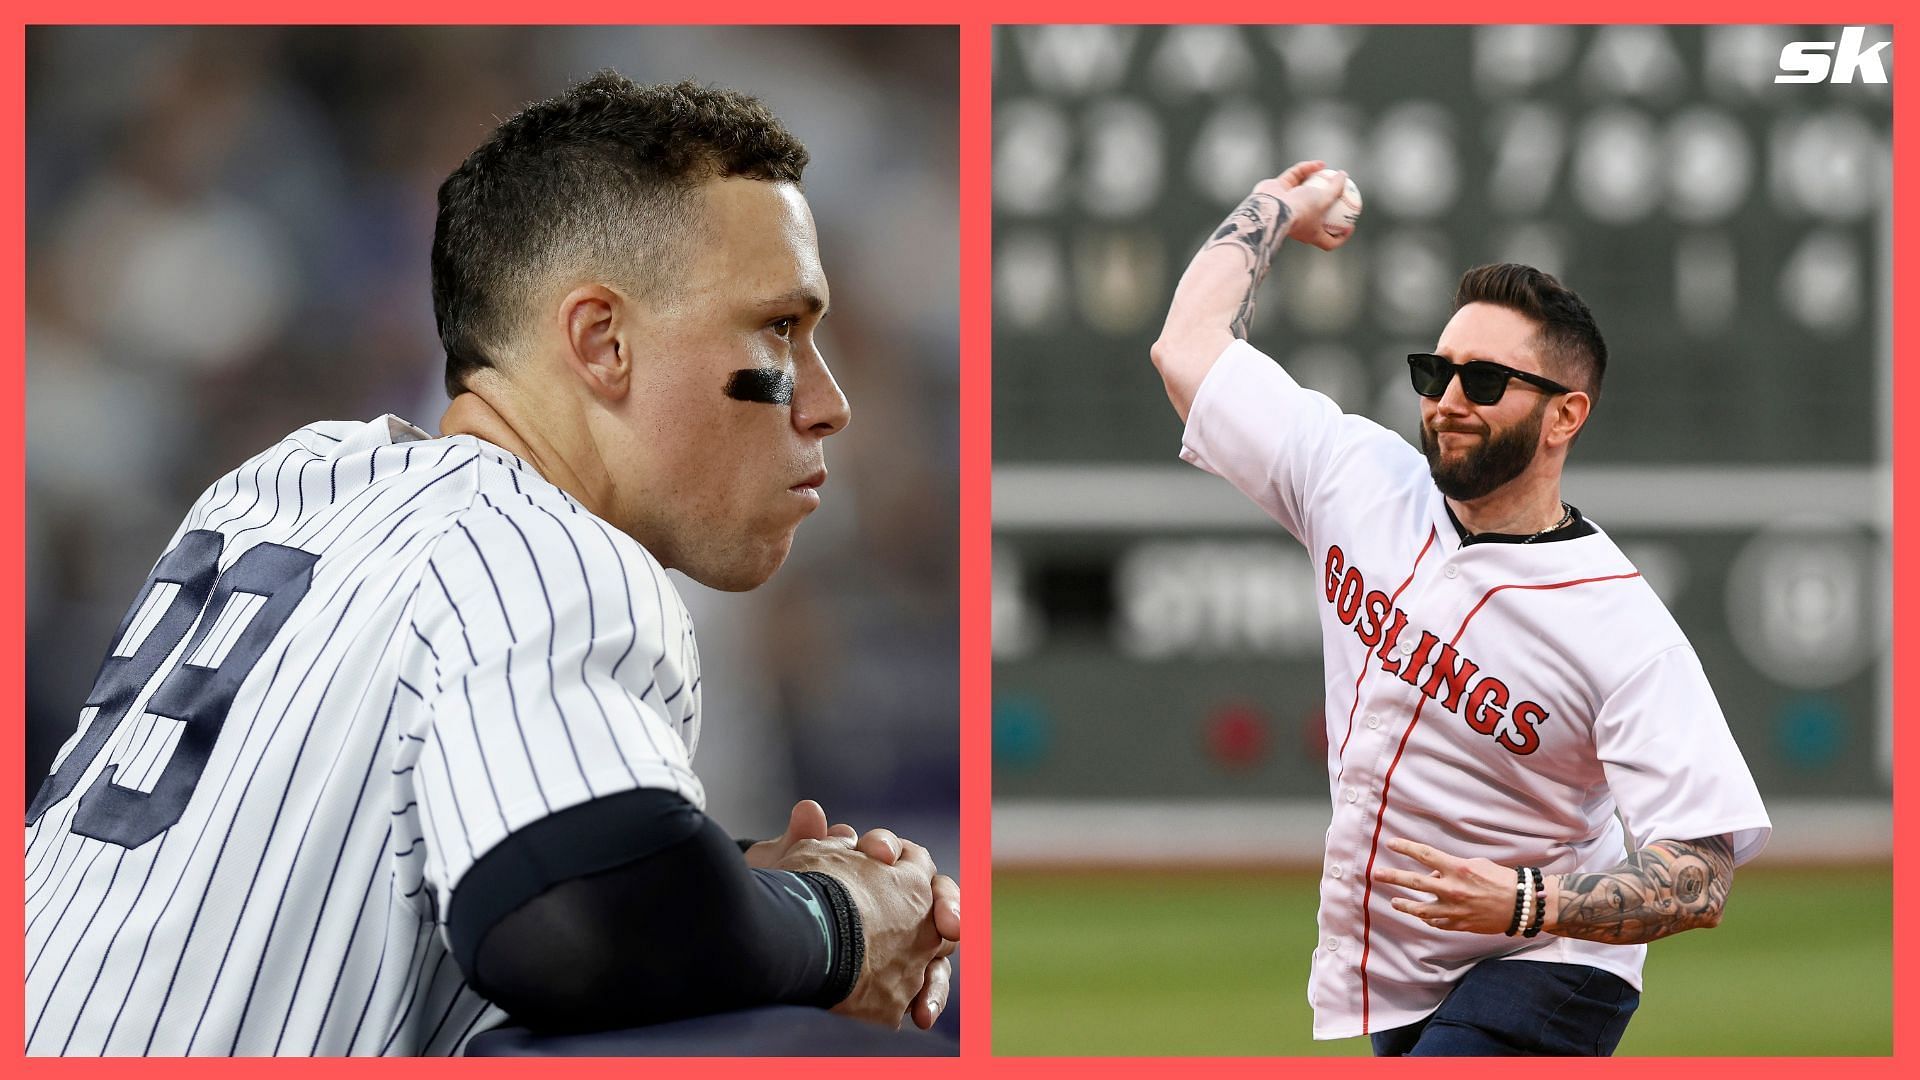 MLB analyst Jared Carrabis disheartened by Yankees recent struggles